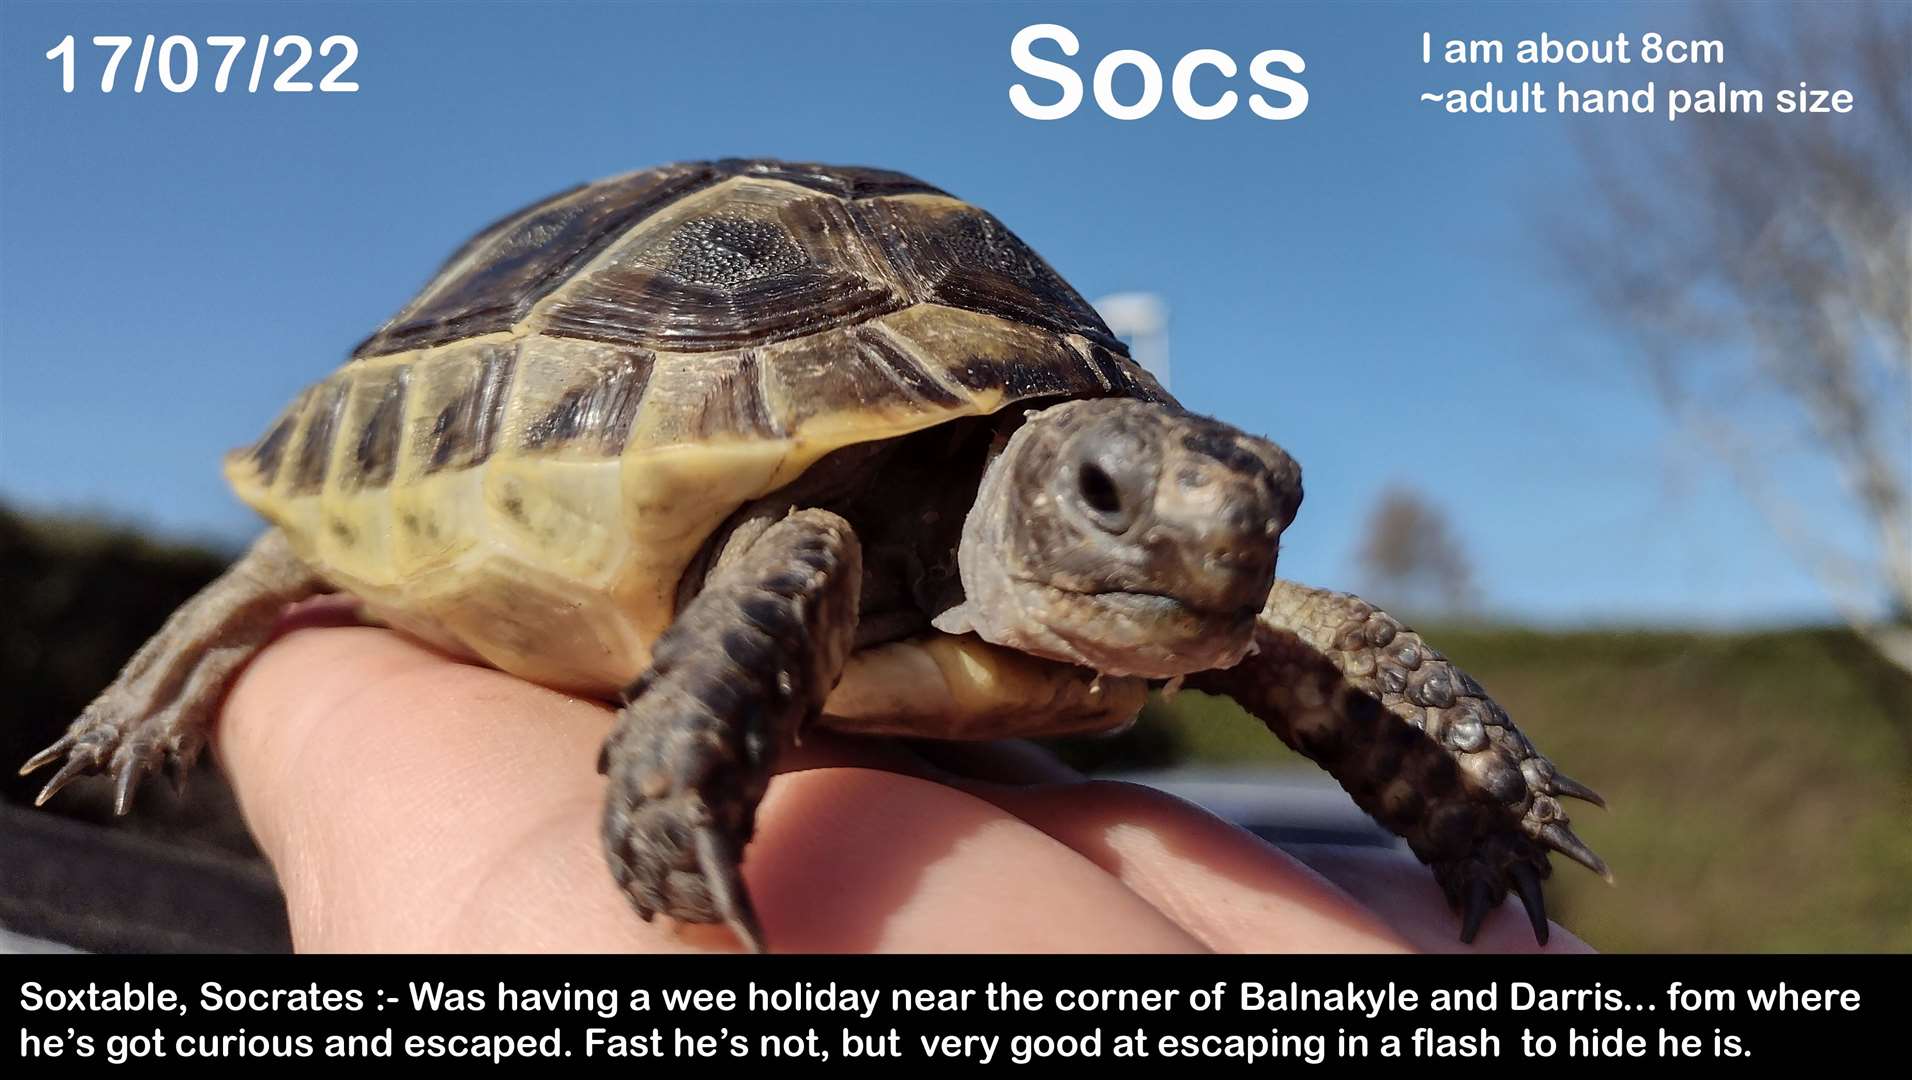 Socrates, the runaway tortoise, has sparked a garden to garden search in the Lochardil area of Inverness